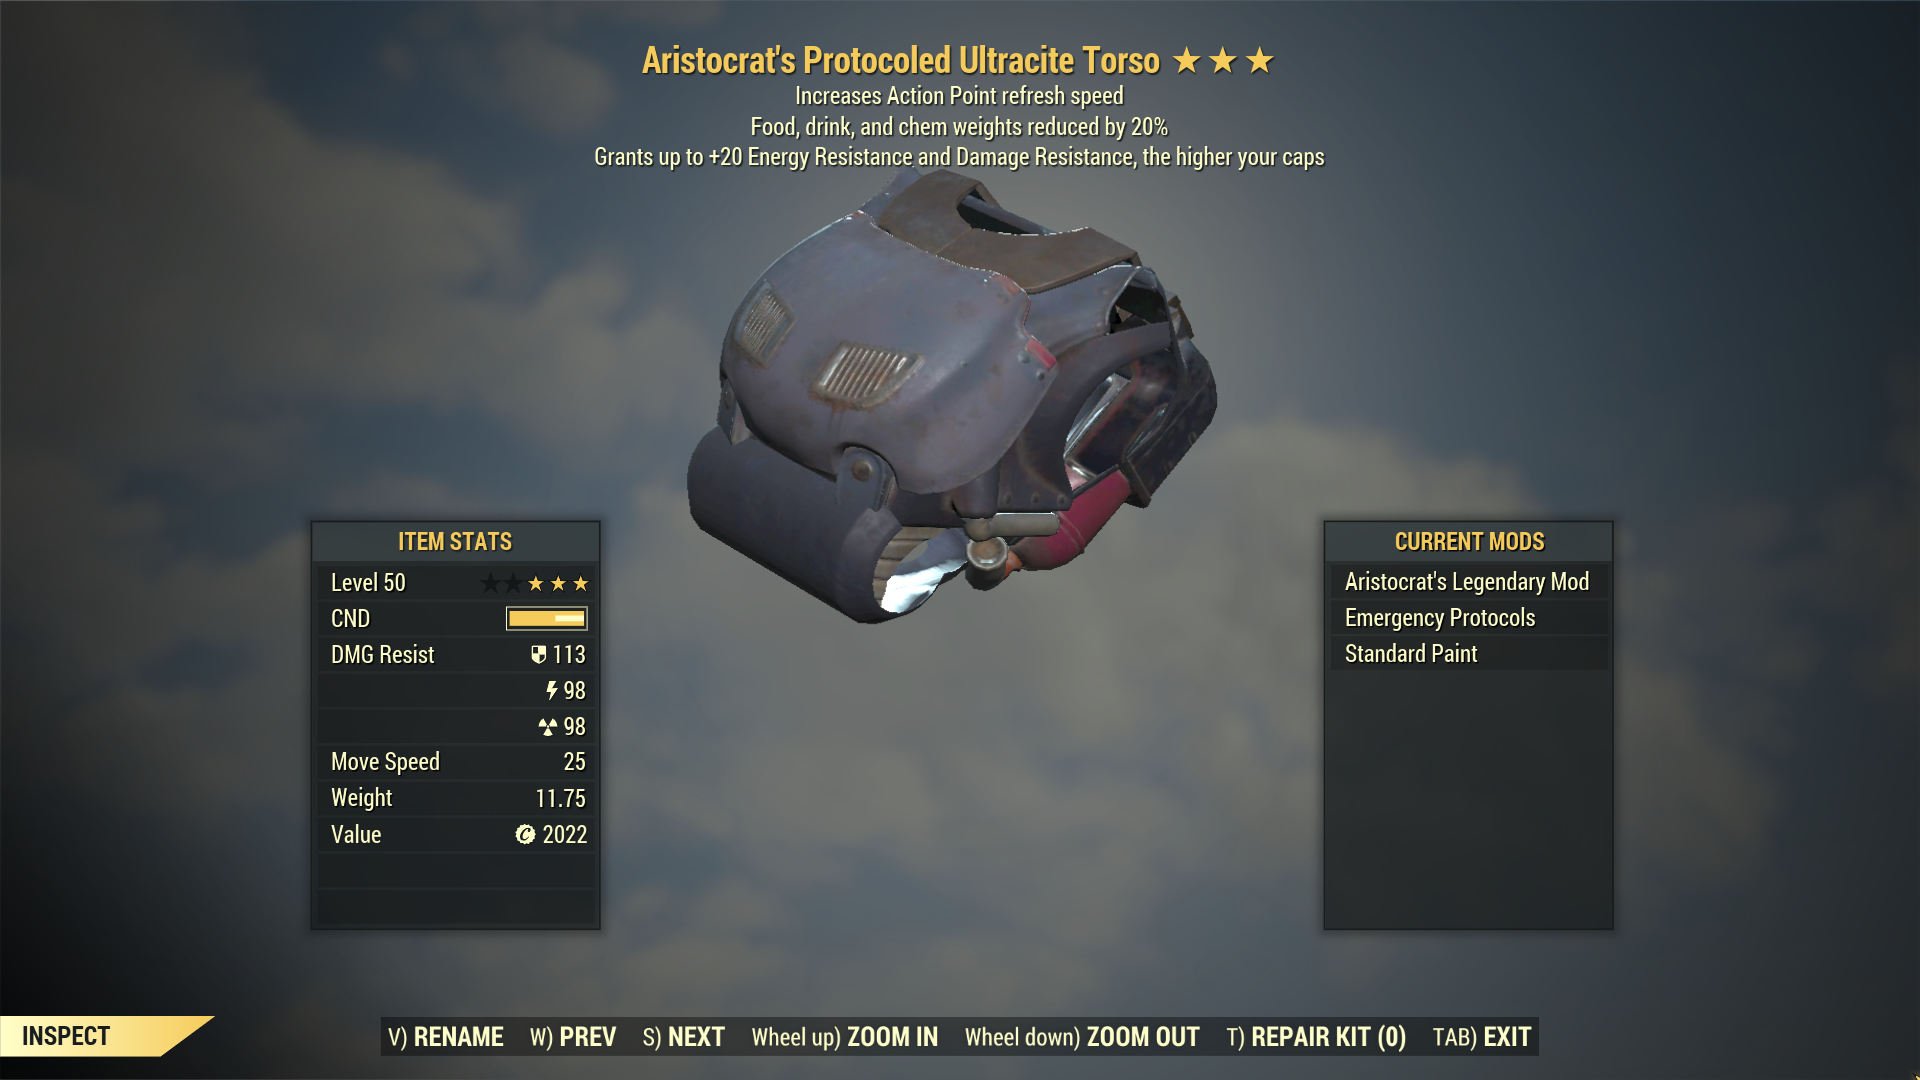 Aristocrat's Food Chems Weight Redcued Ultracite Power Armor + AP Refresh + Ultracite Jet Pack Helm